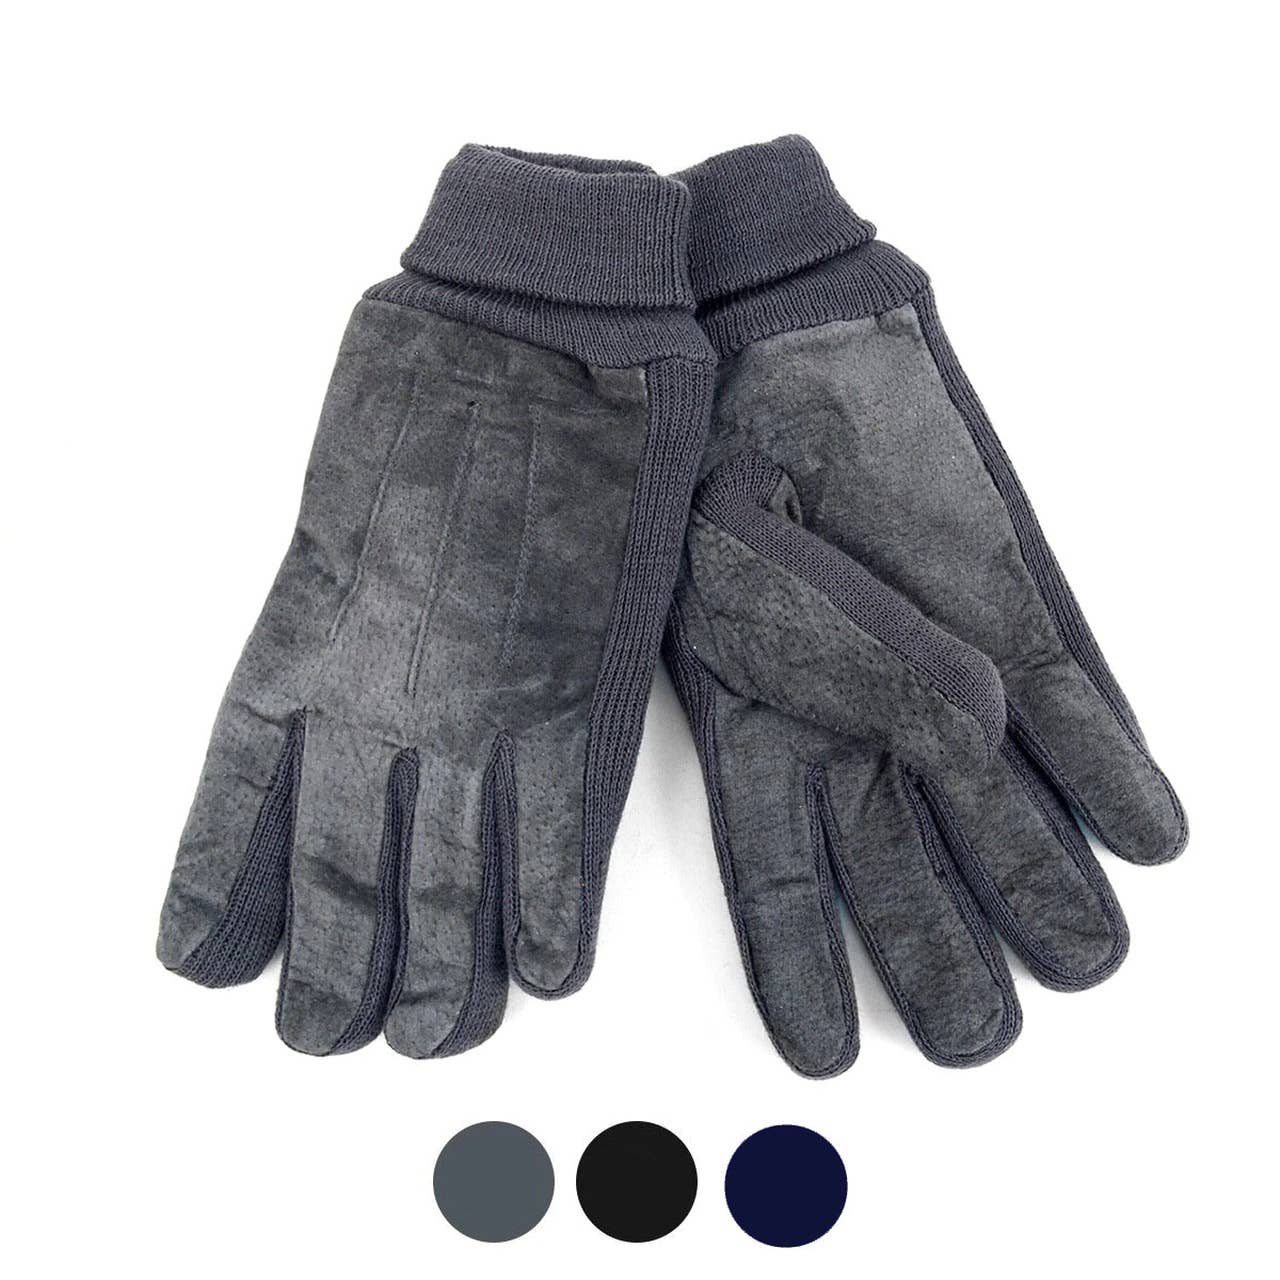 Men's Genuine Leather Winter Gloves with Soft Acrylic Lining: Black / L/XL